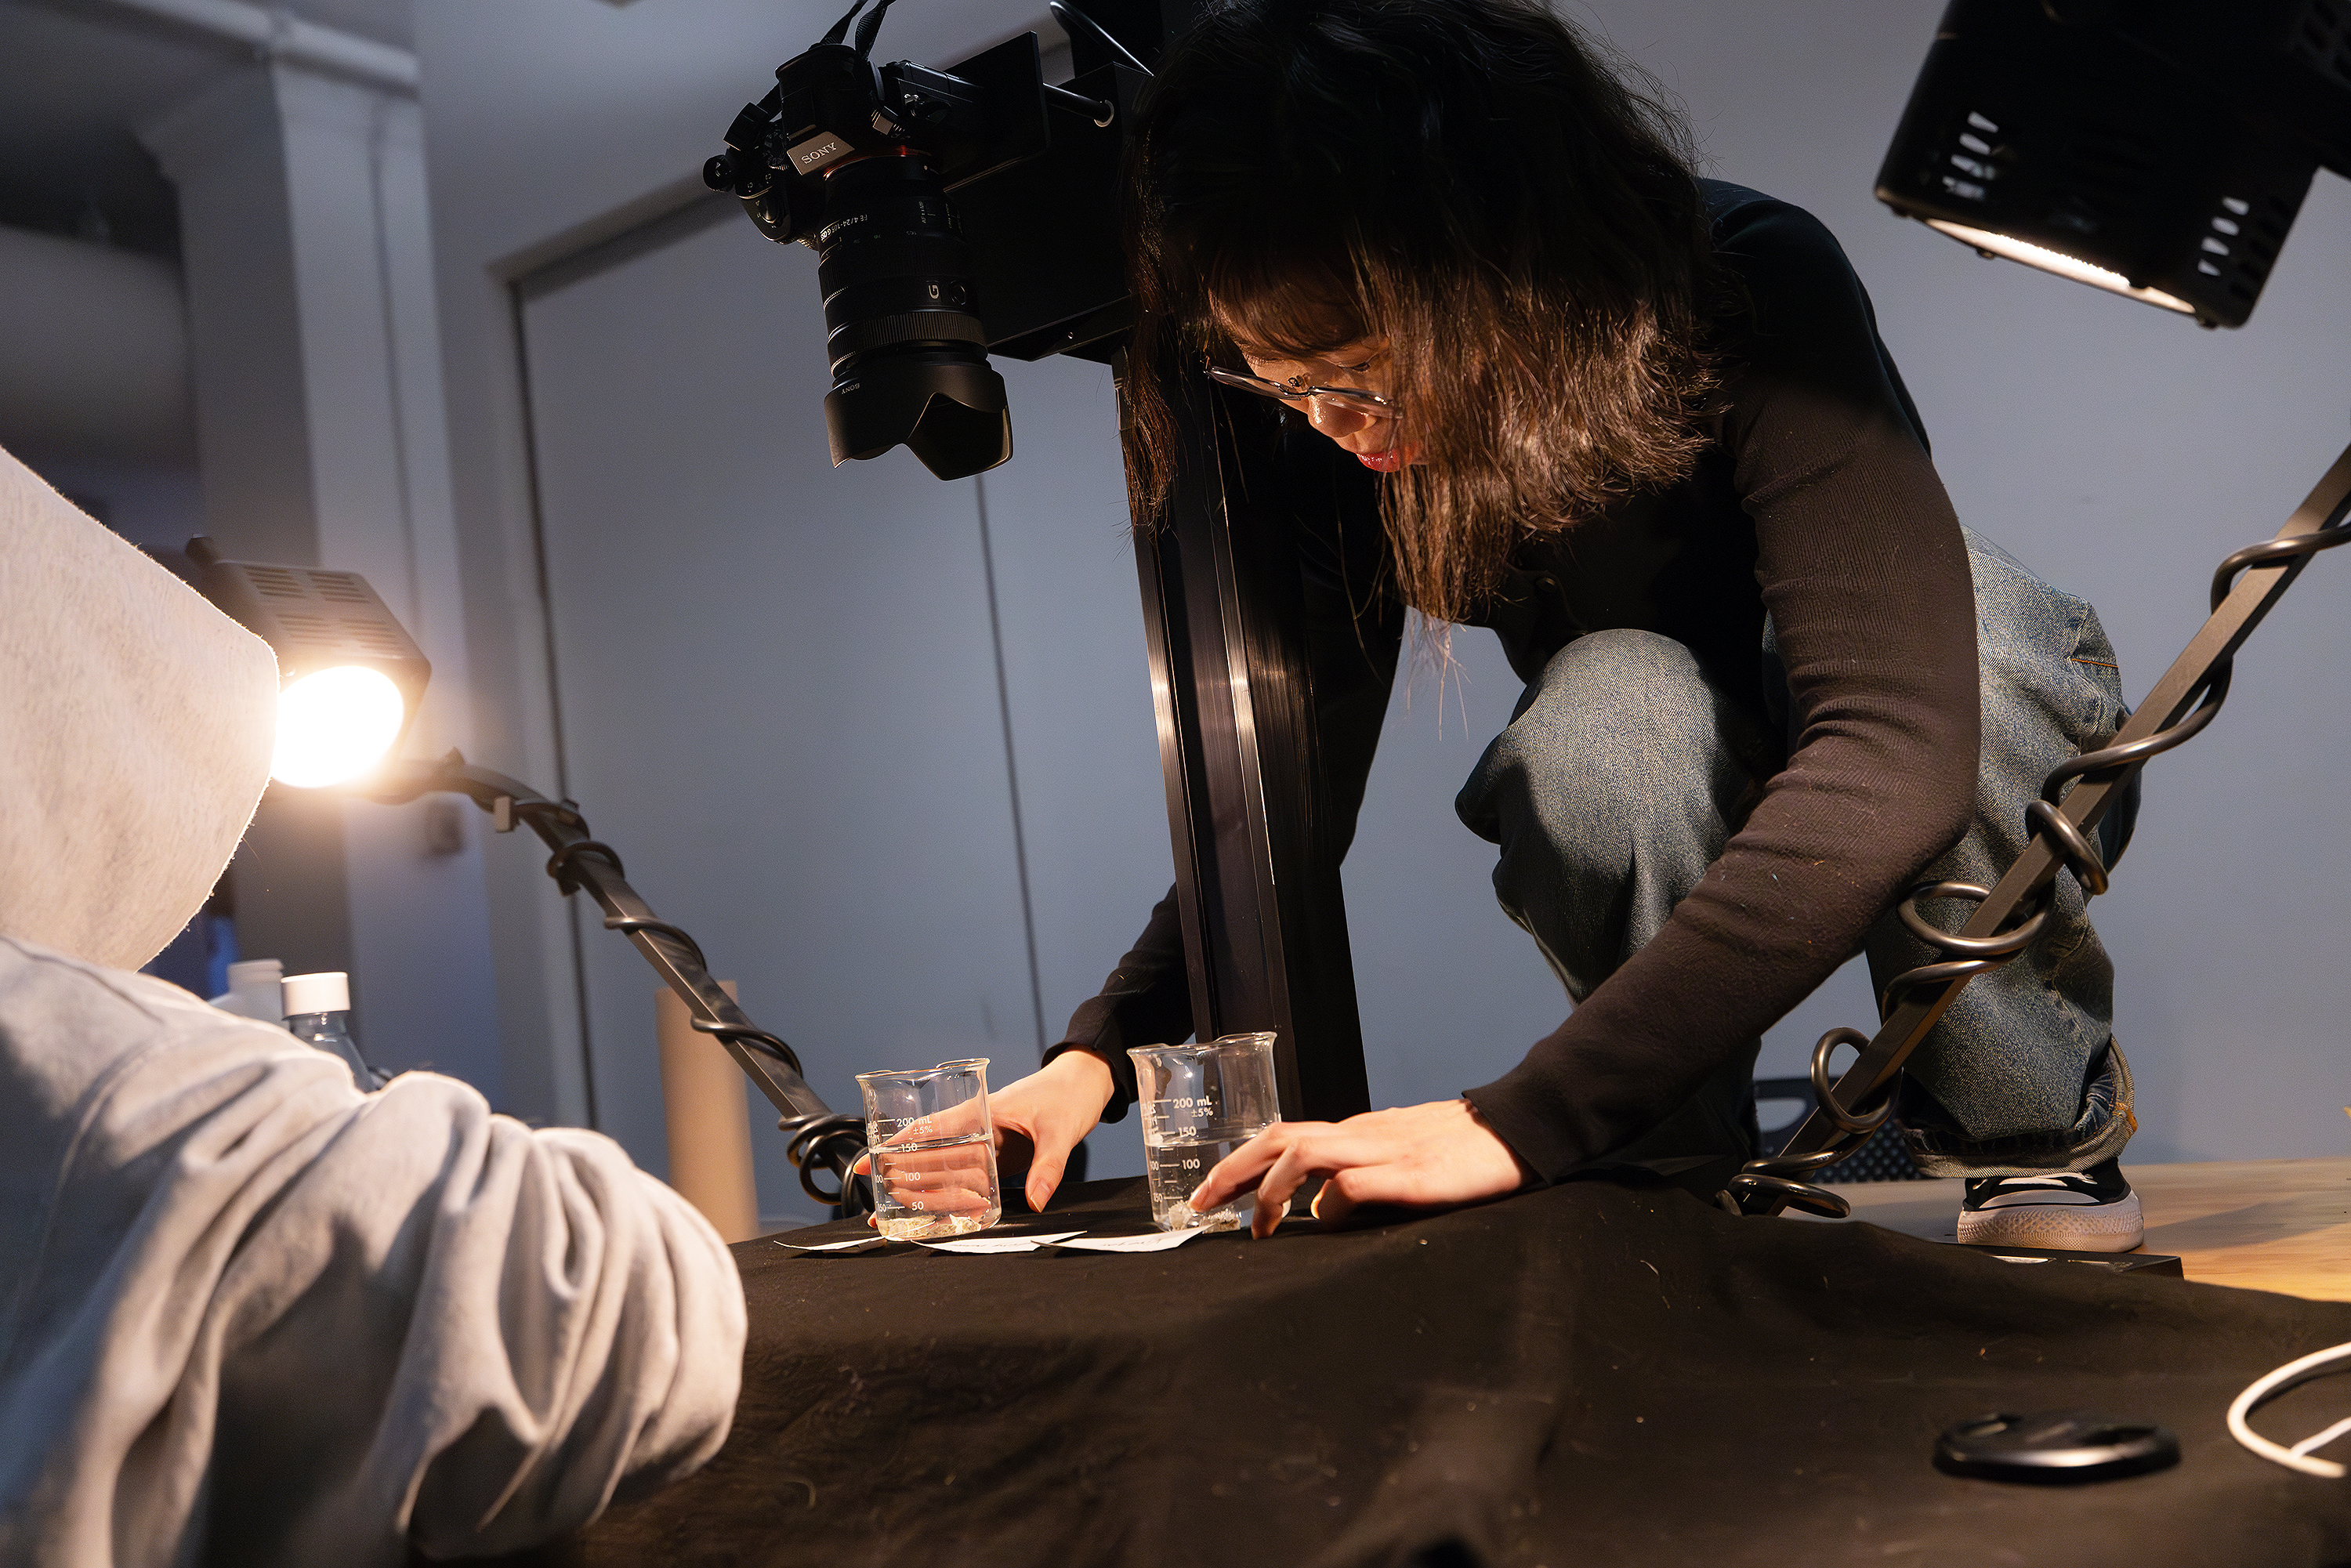 grad student collaborator at work on a stop-motion animation